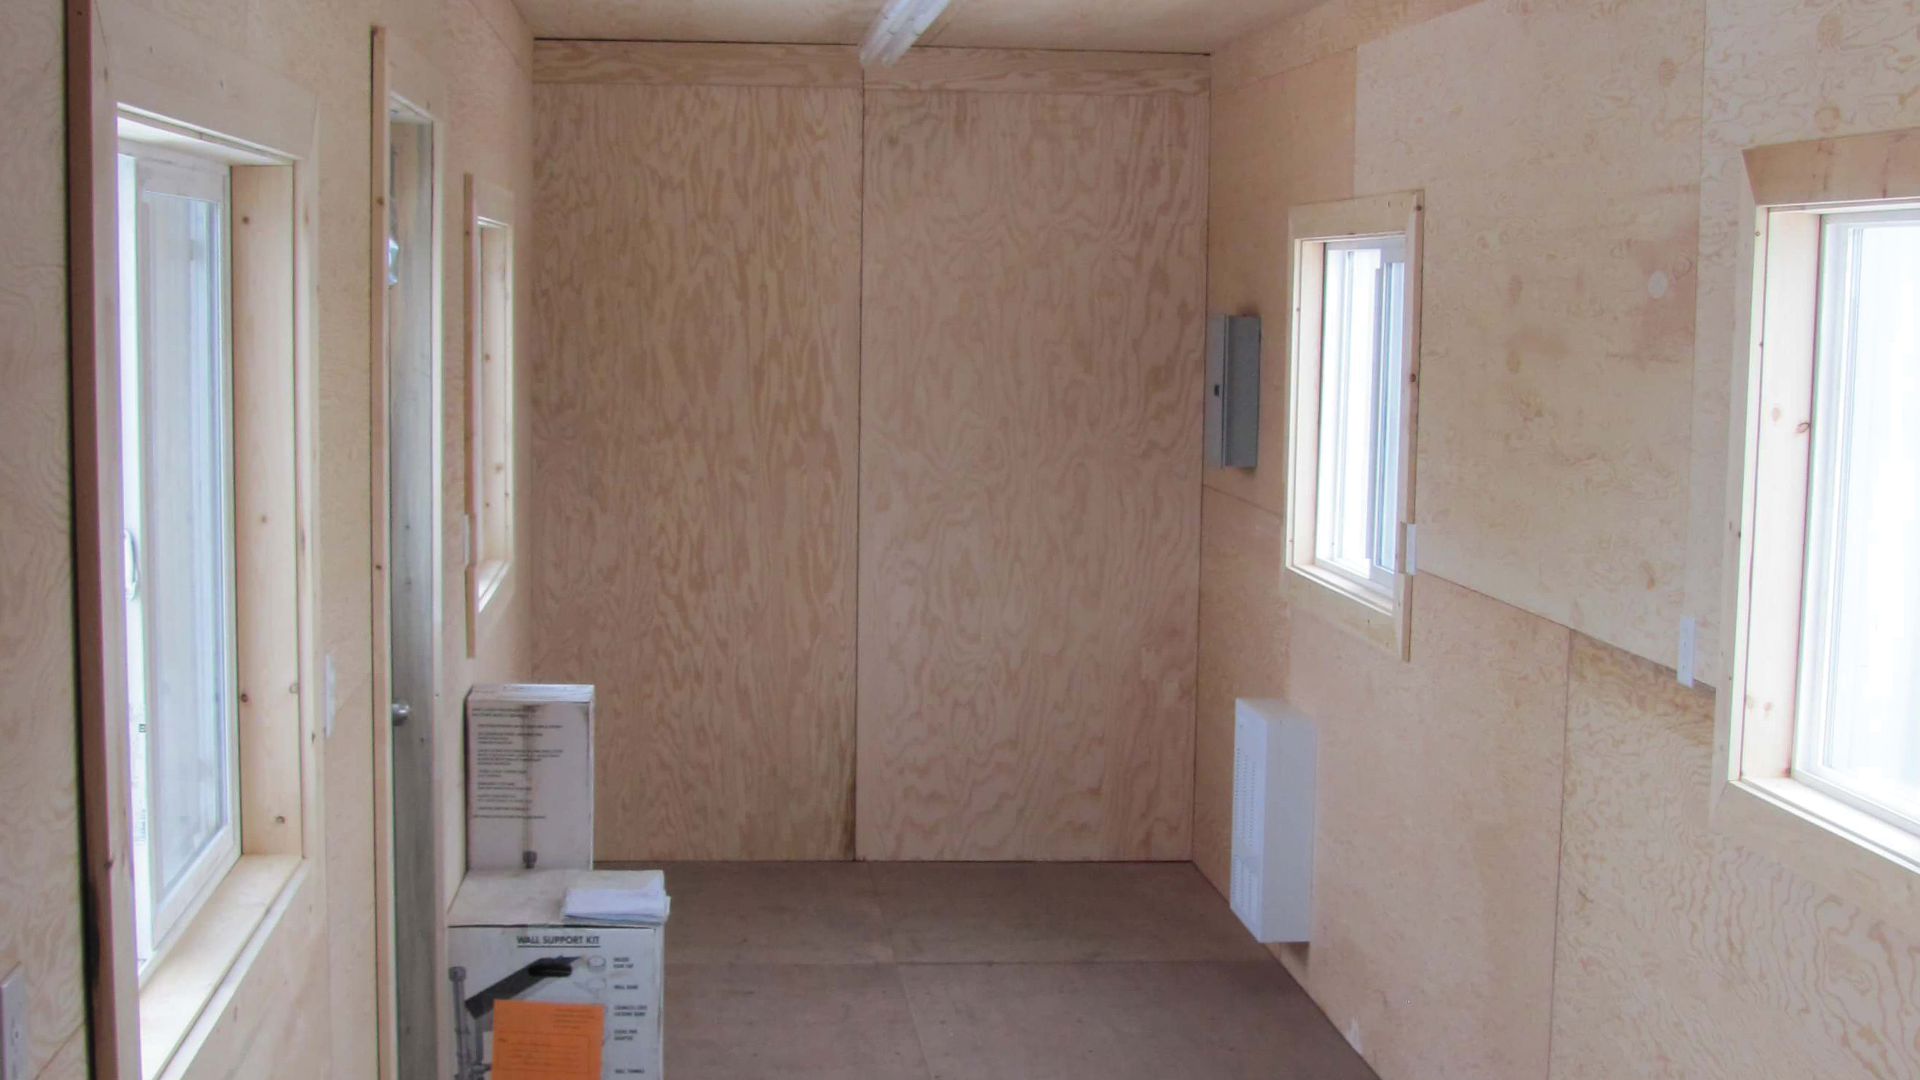 Interior of container covered in plywood